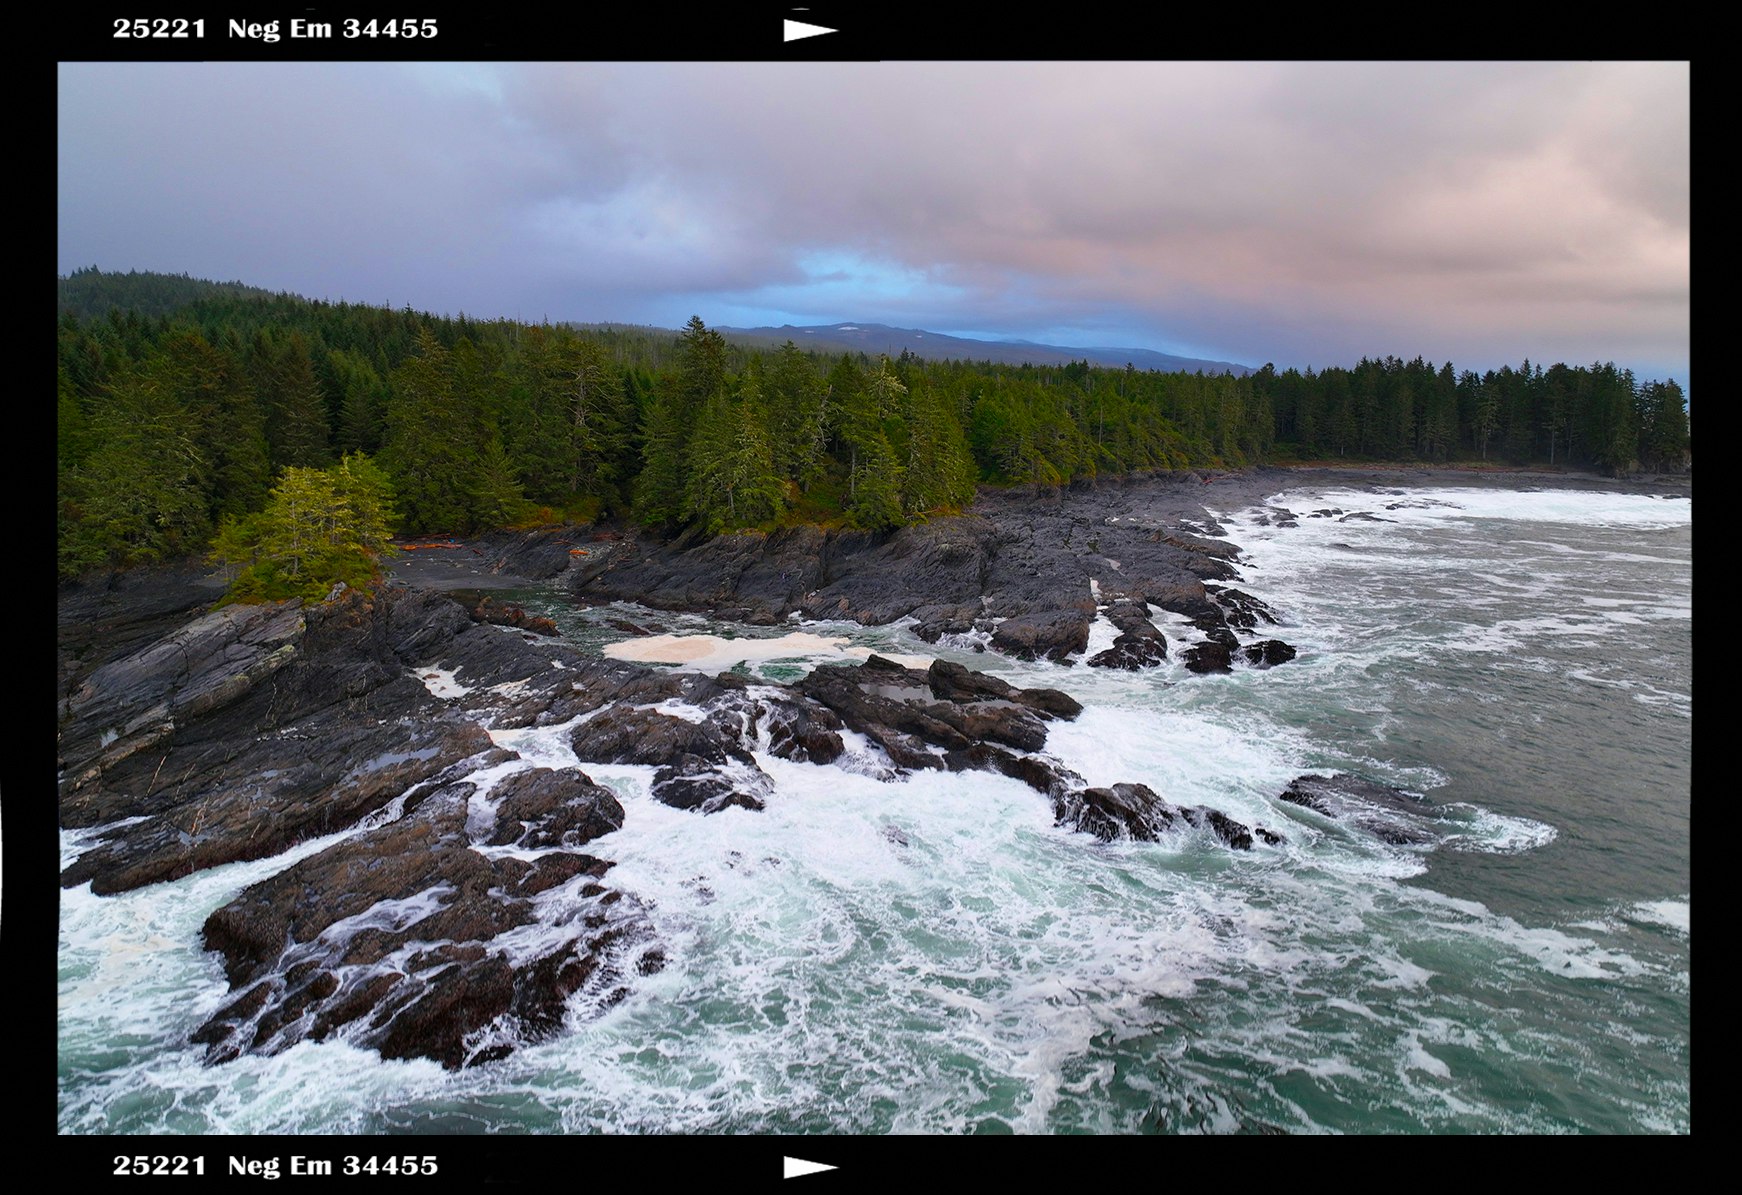 Stormy waters off Vancouver Island